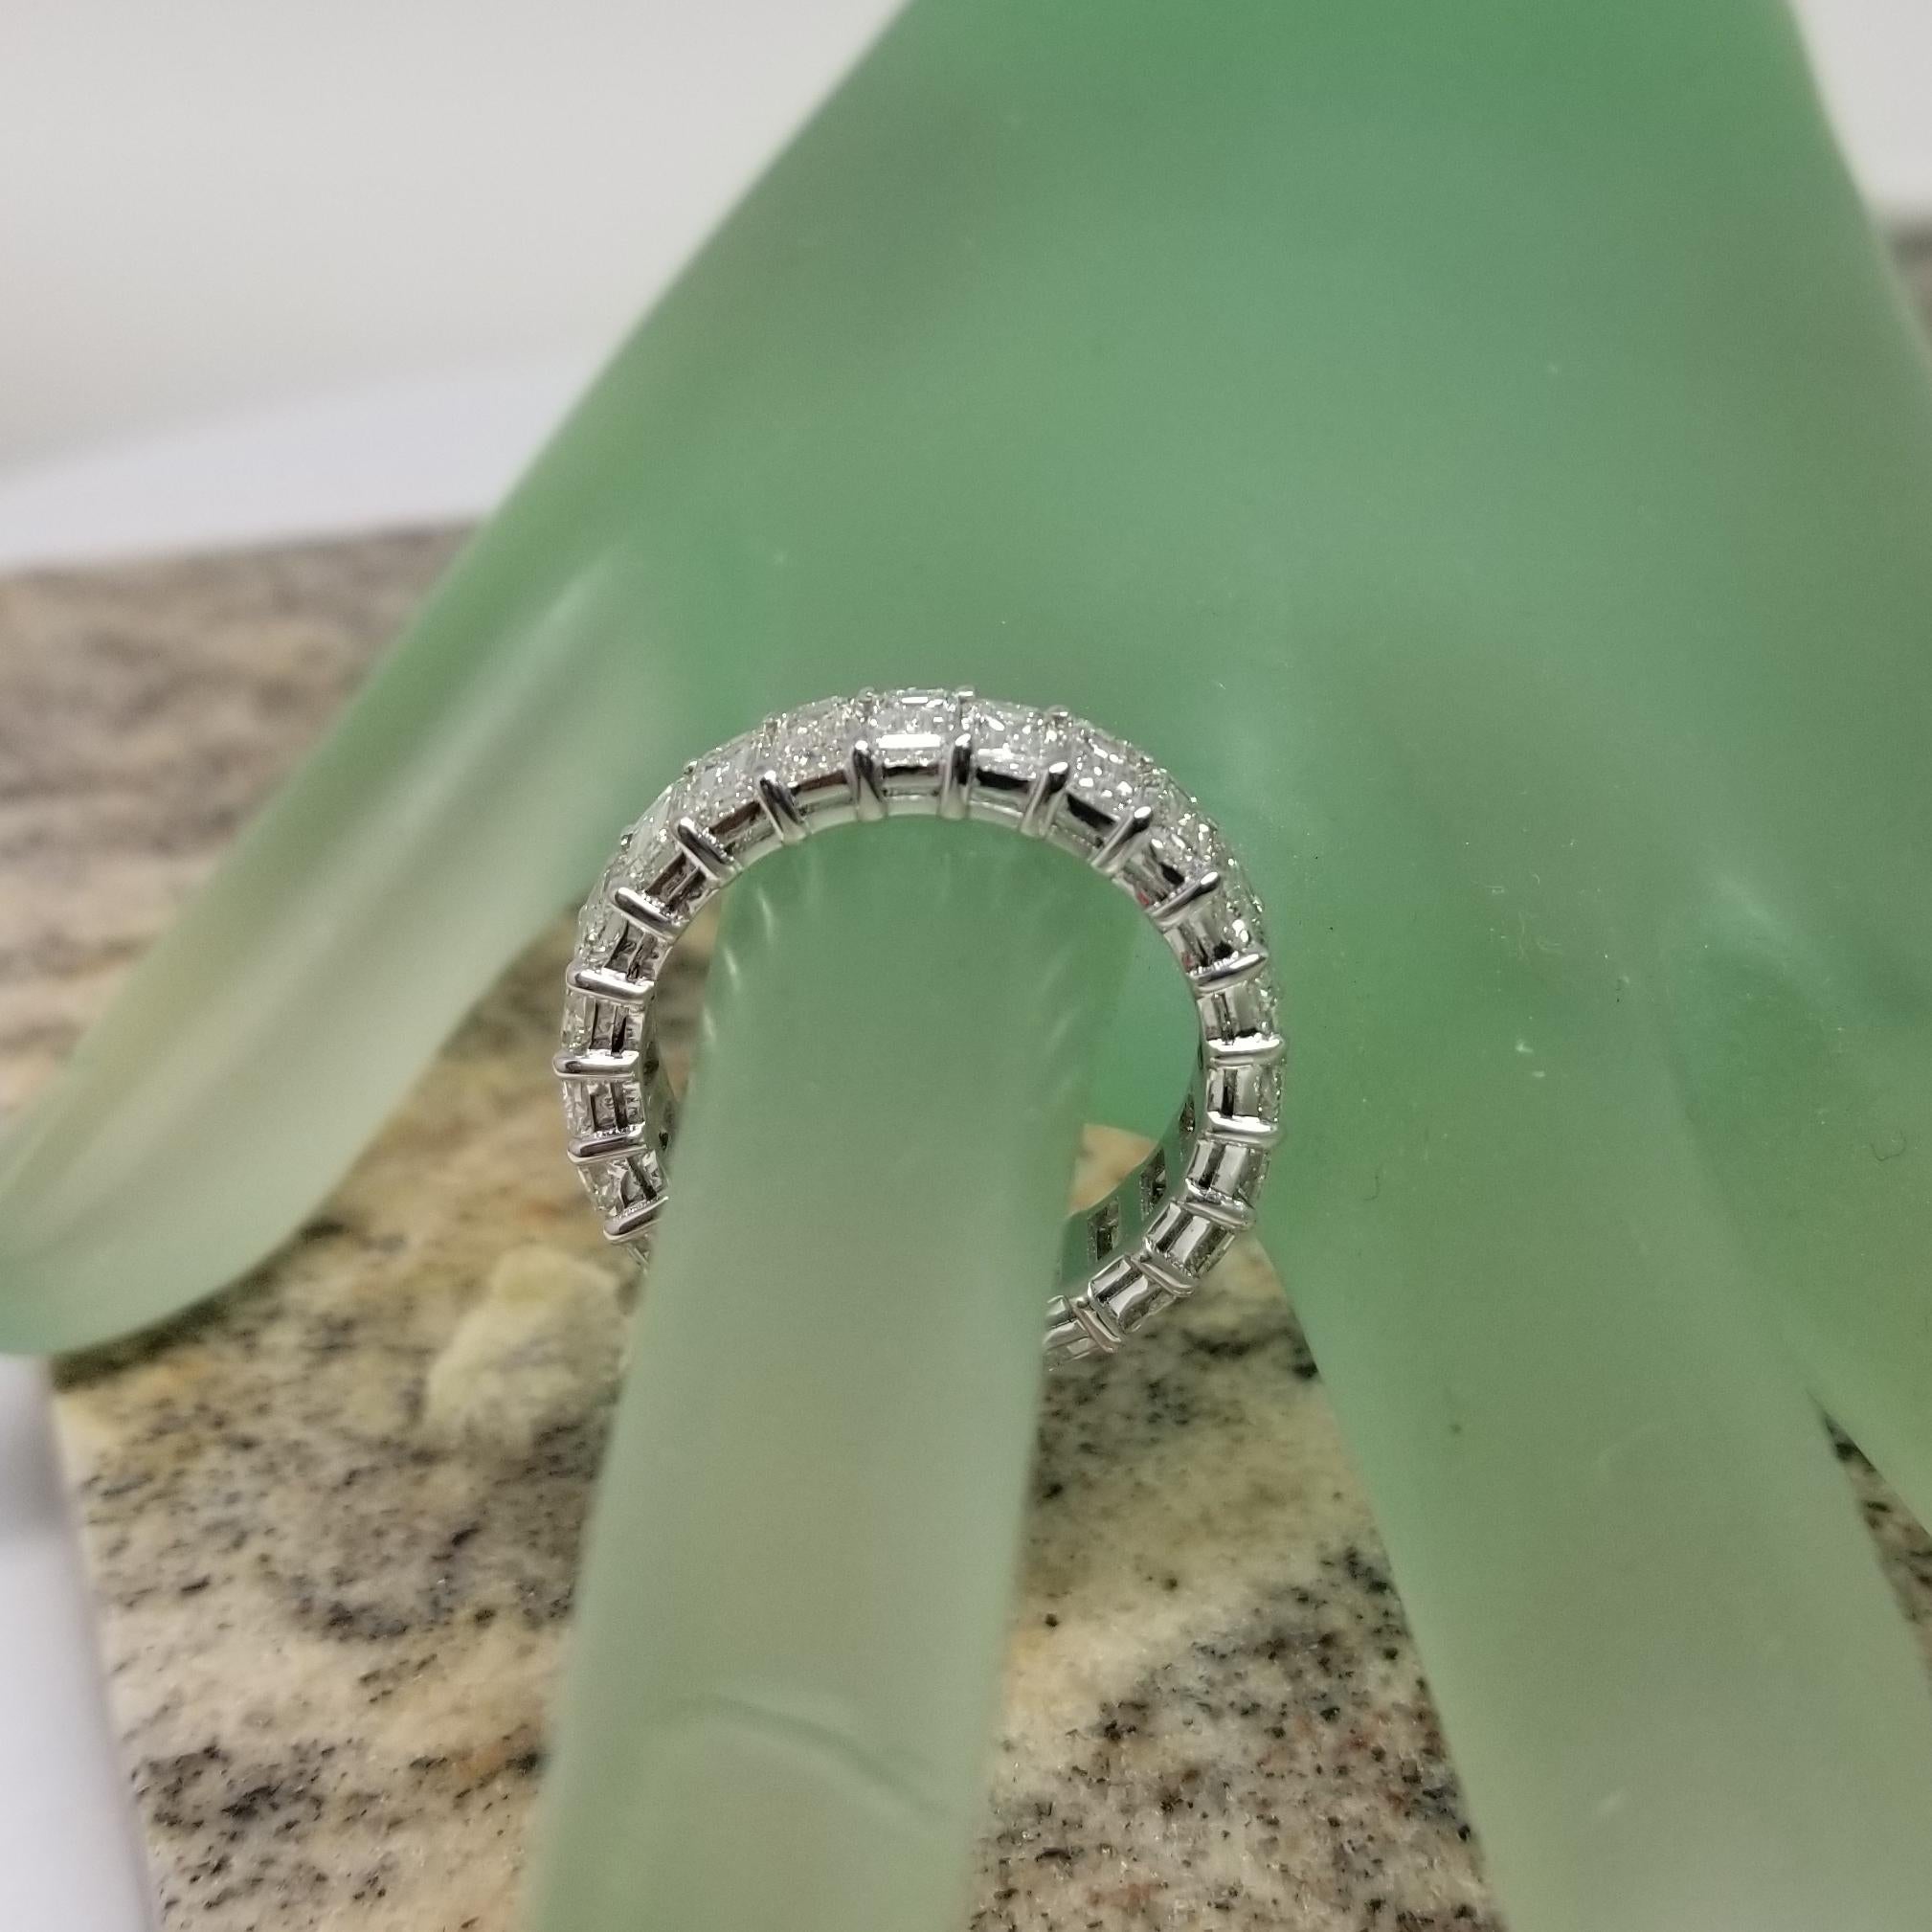 Emerald Cut Diamond Eternity Ring Set in 14 Karat White Gold Weighing 7.25 Carat In New Condition For Sale In Los Angeles, CA